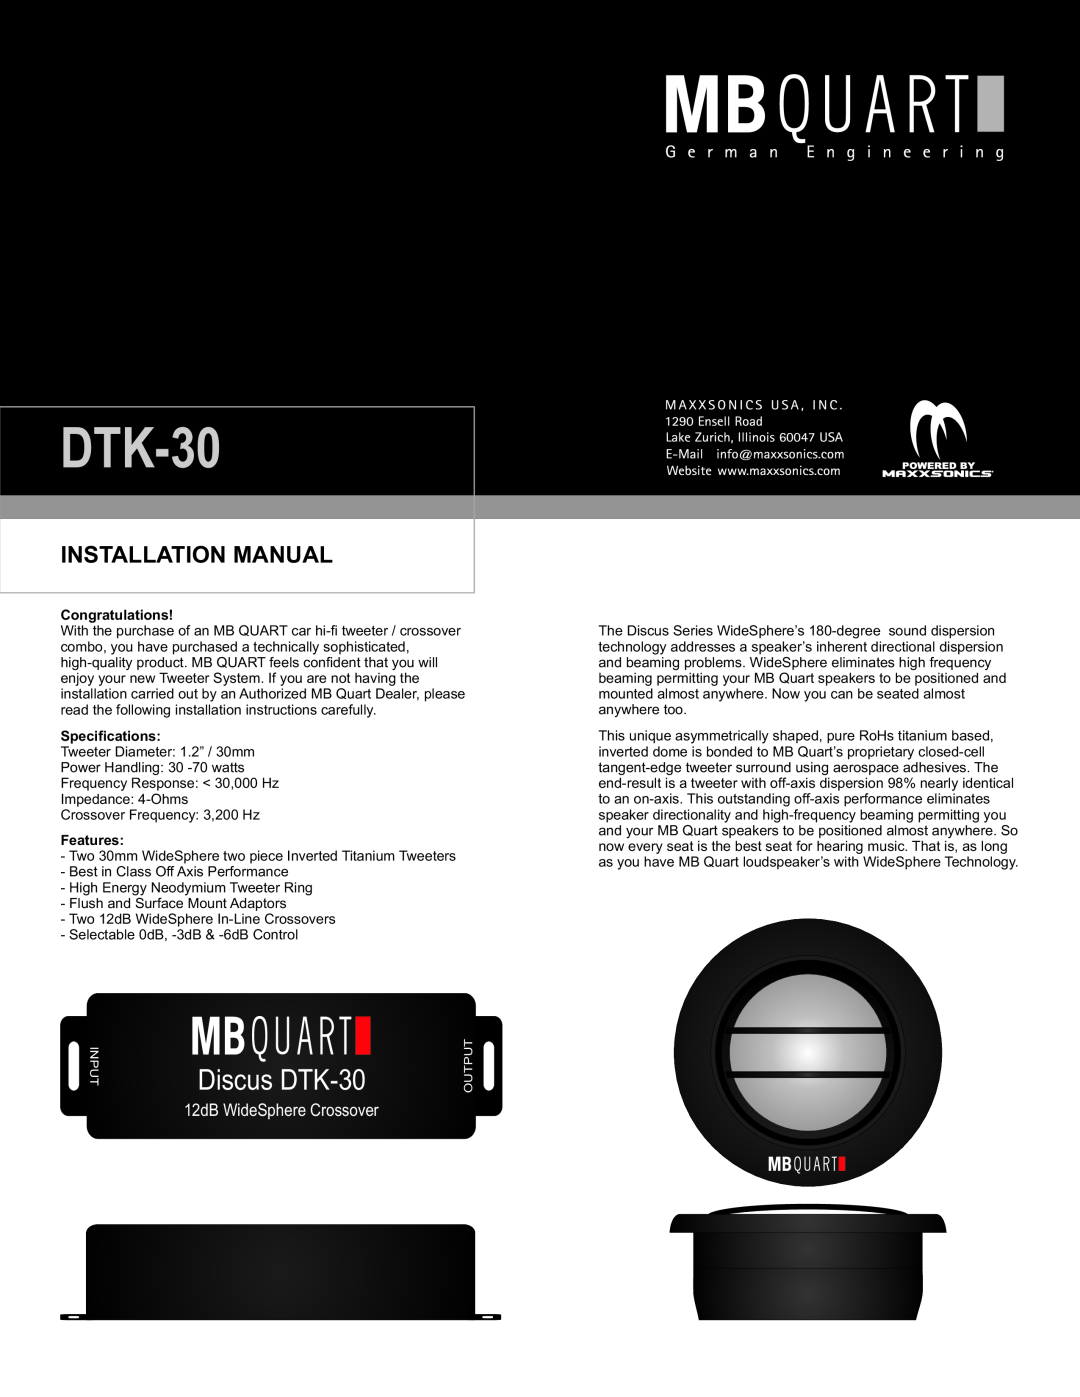 MB QUART installation manual Installation Manual, Congratulations, Specifications, Features, Discus DTK-30 